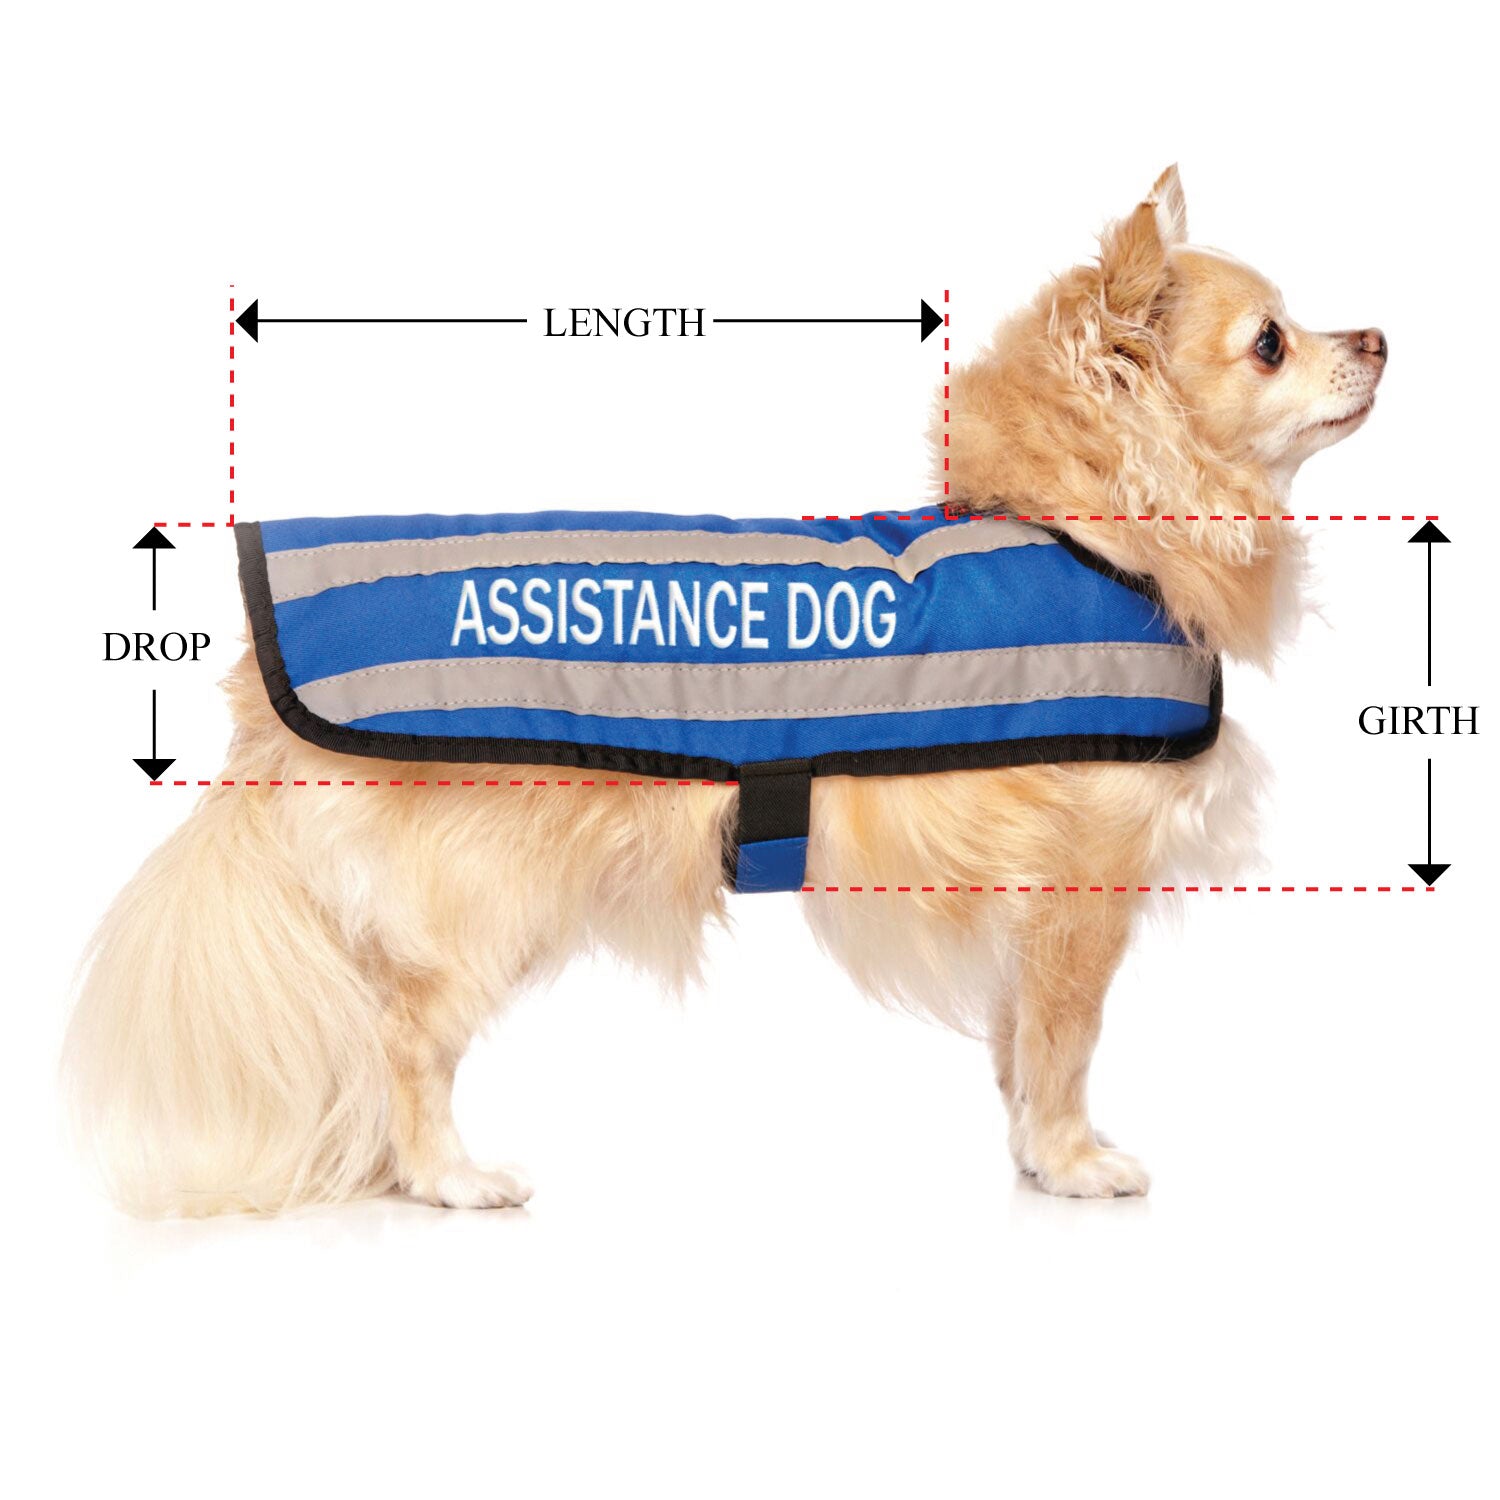 ASSISTANCE DOG - Small Coat